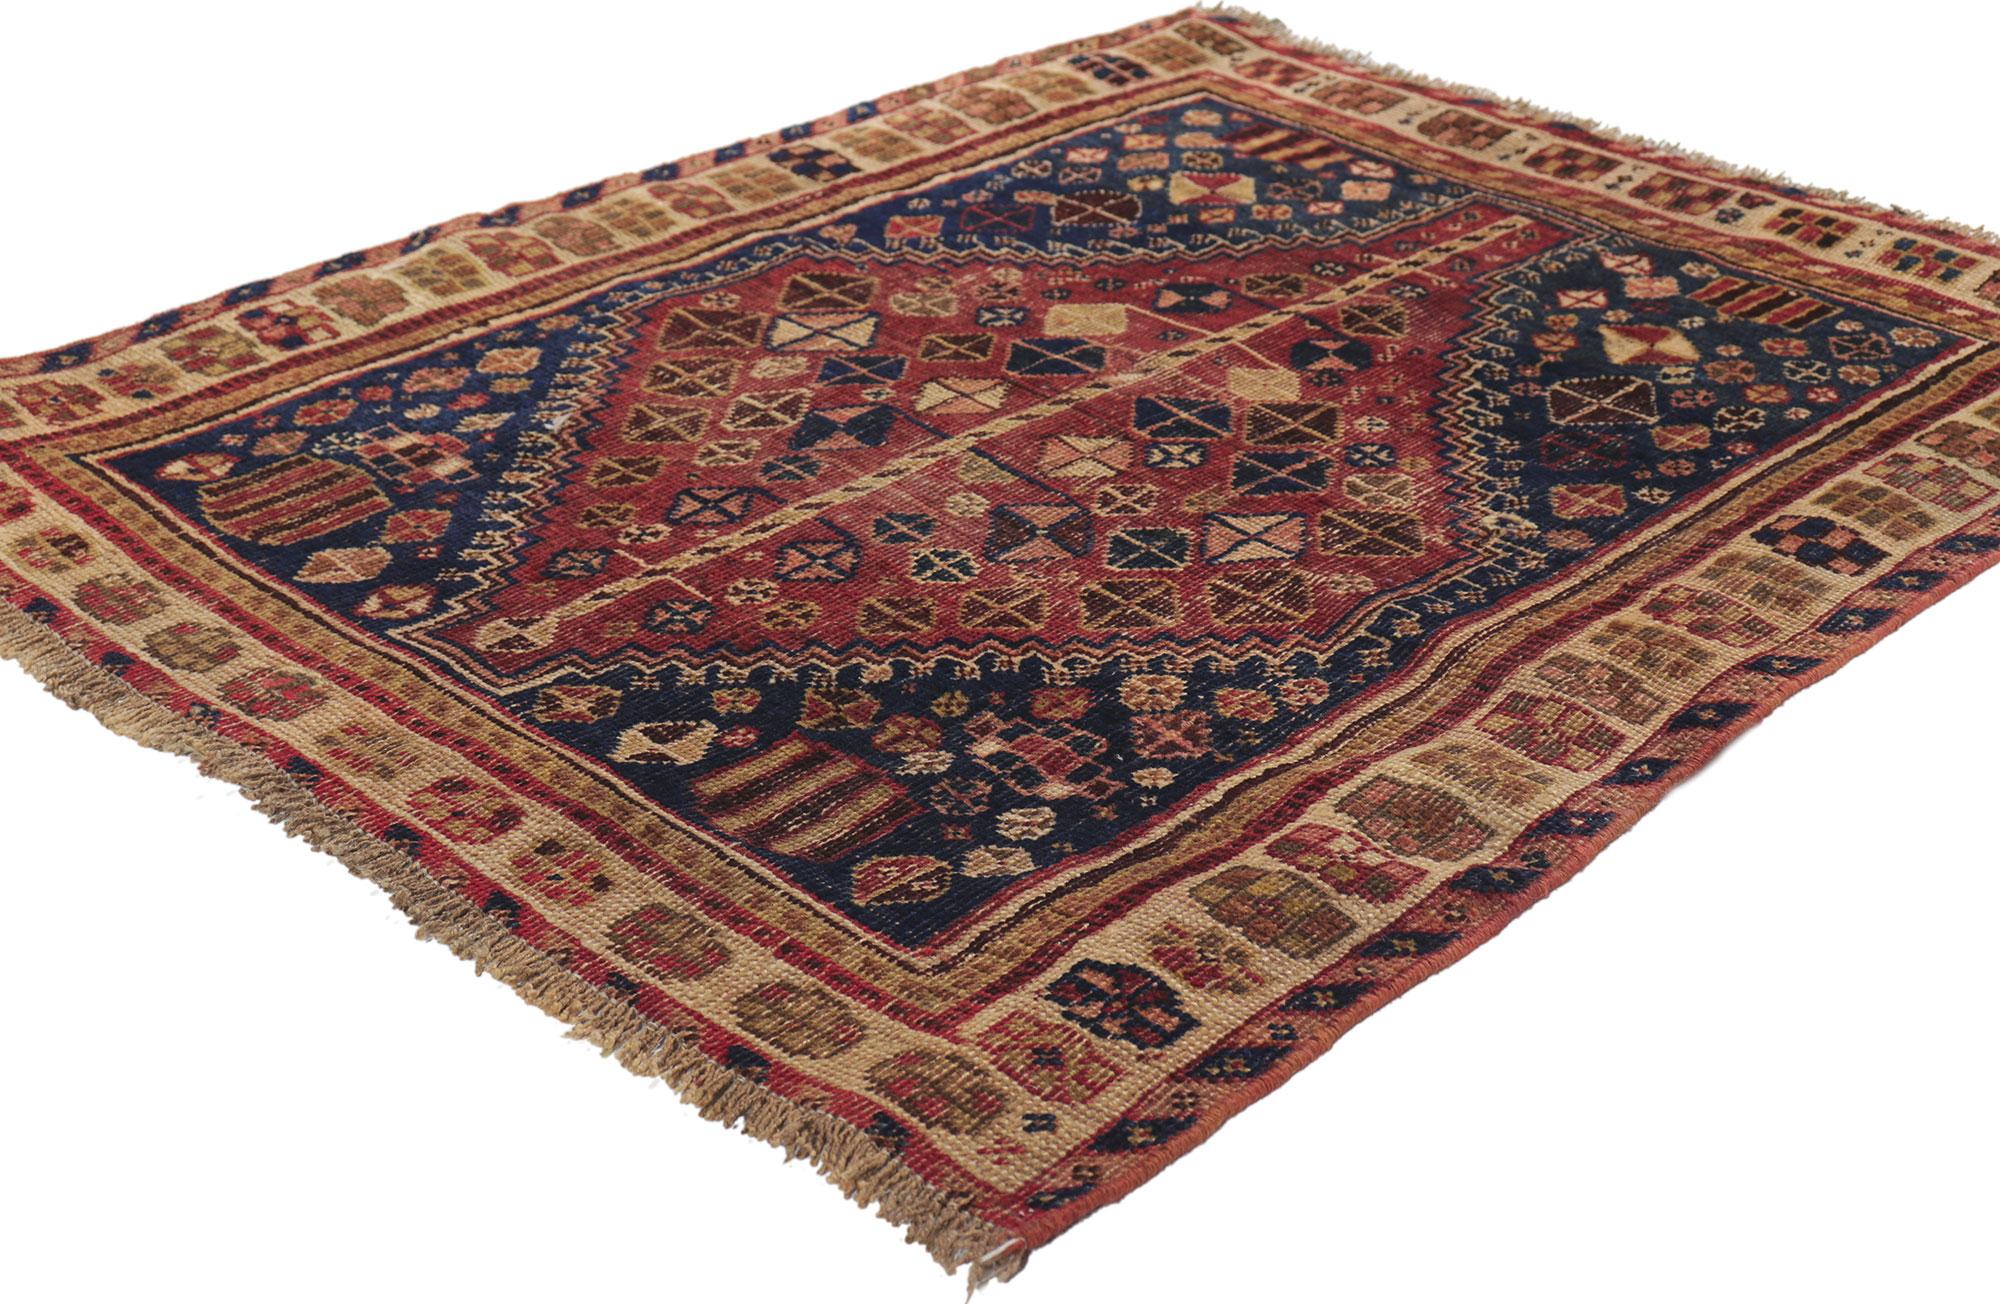 61217 Antique Persian Shiraz Rug, 02'07 x 03'03.

Full of tiny details and nomadic charm, this hand knotted wool antique Persian Shiraz rug is a captivating vision of woven beauty. The eye-catching tribal design and earthy colorway woven into this